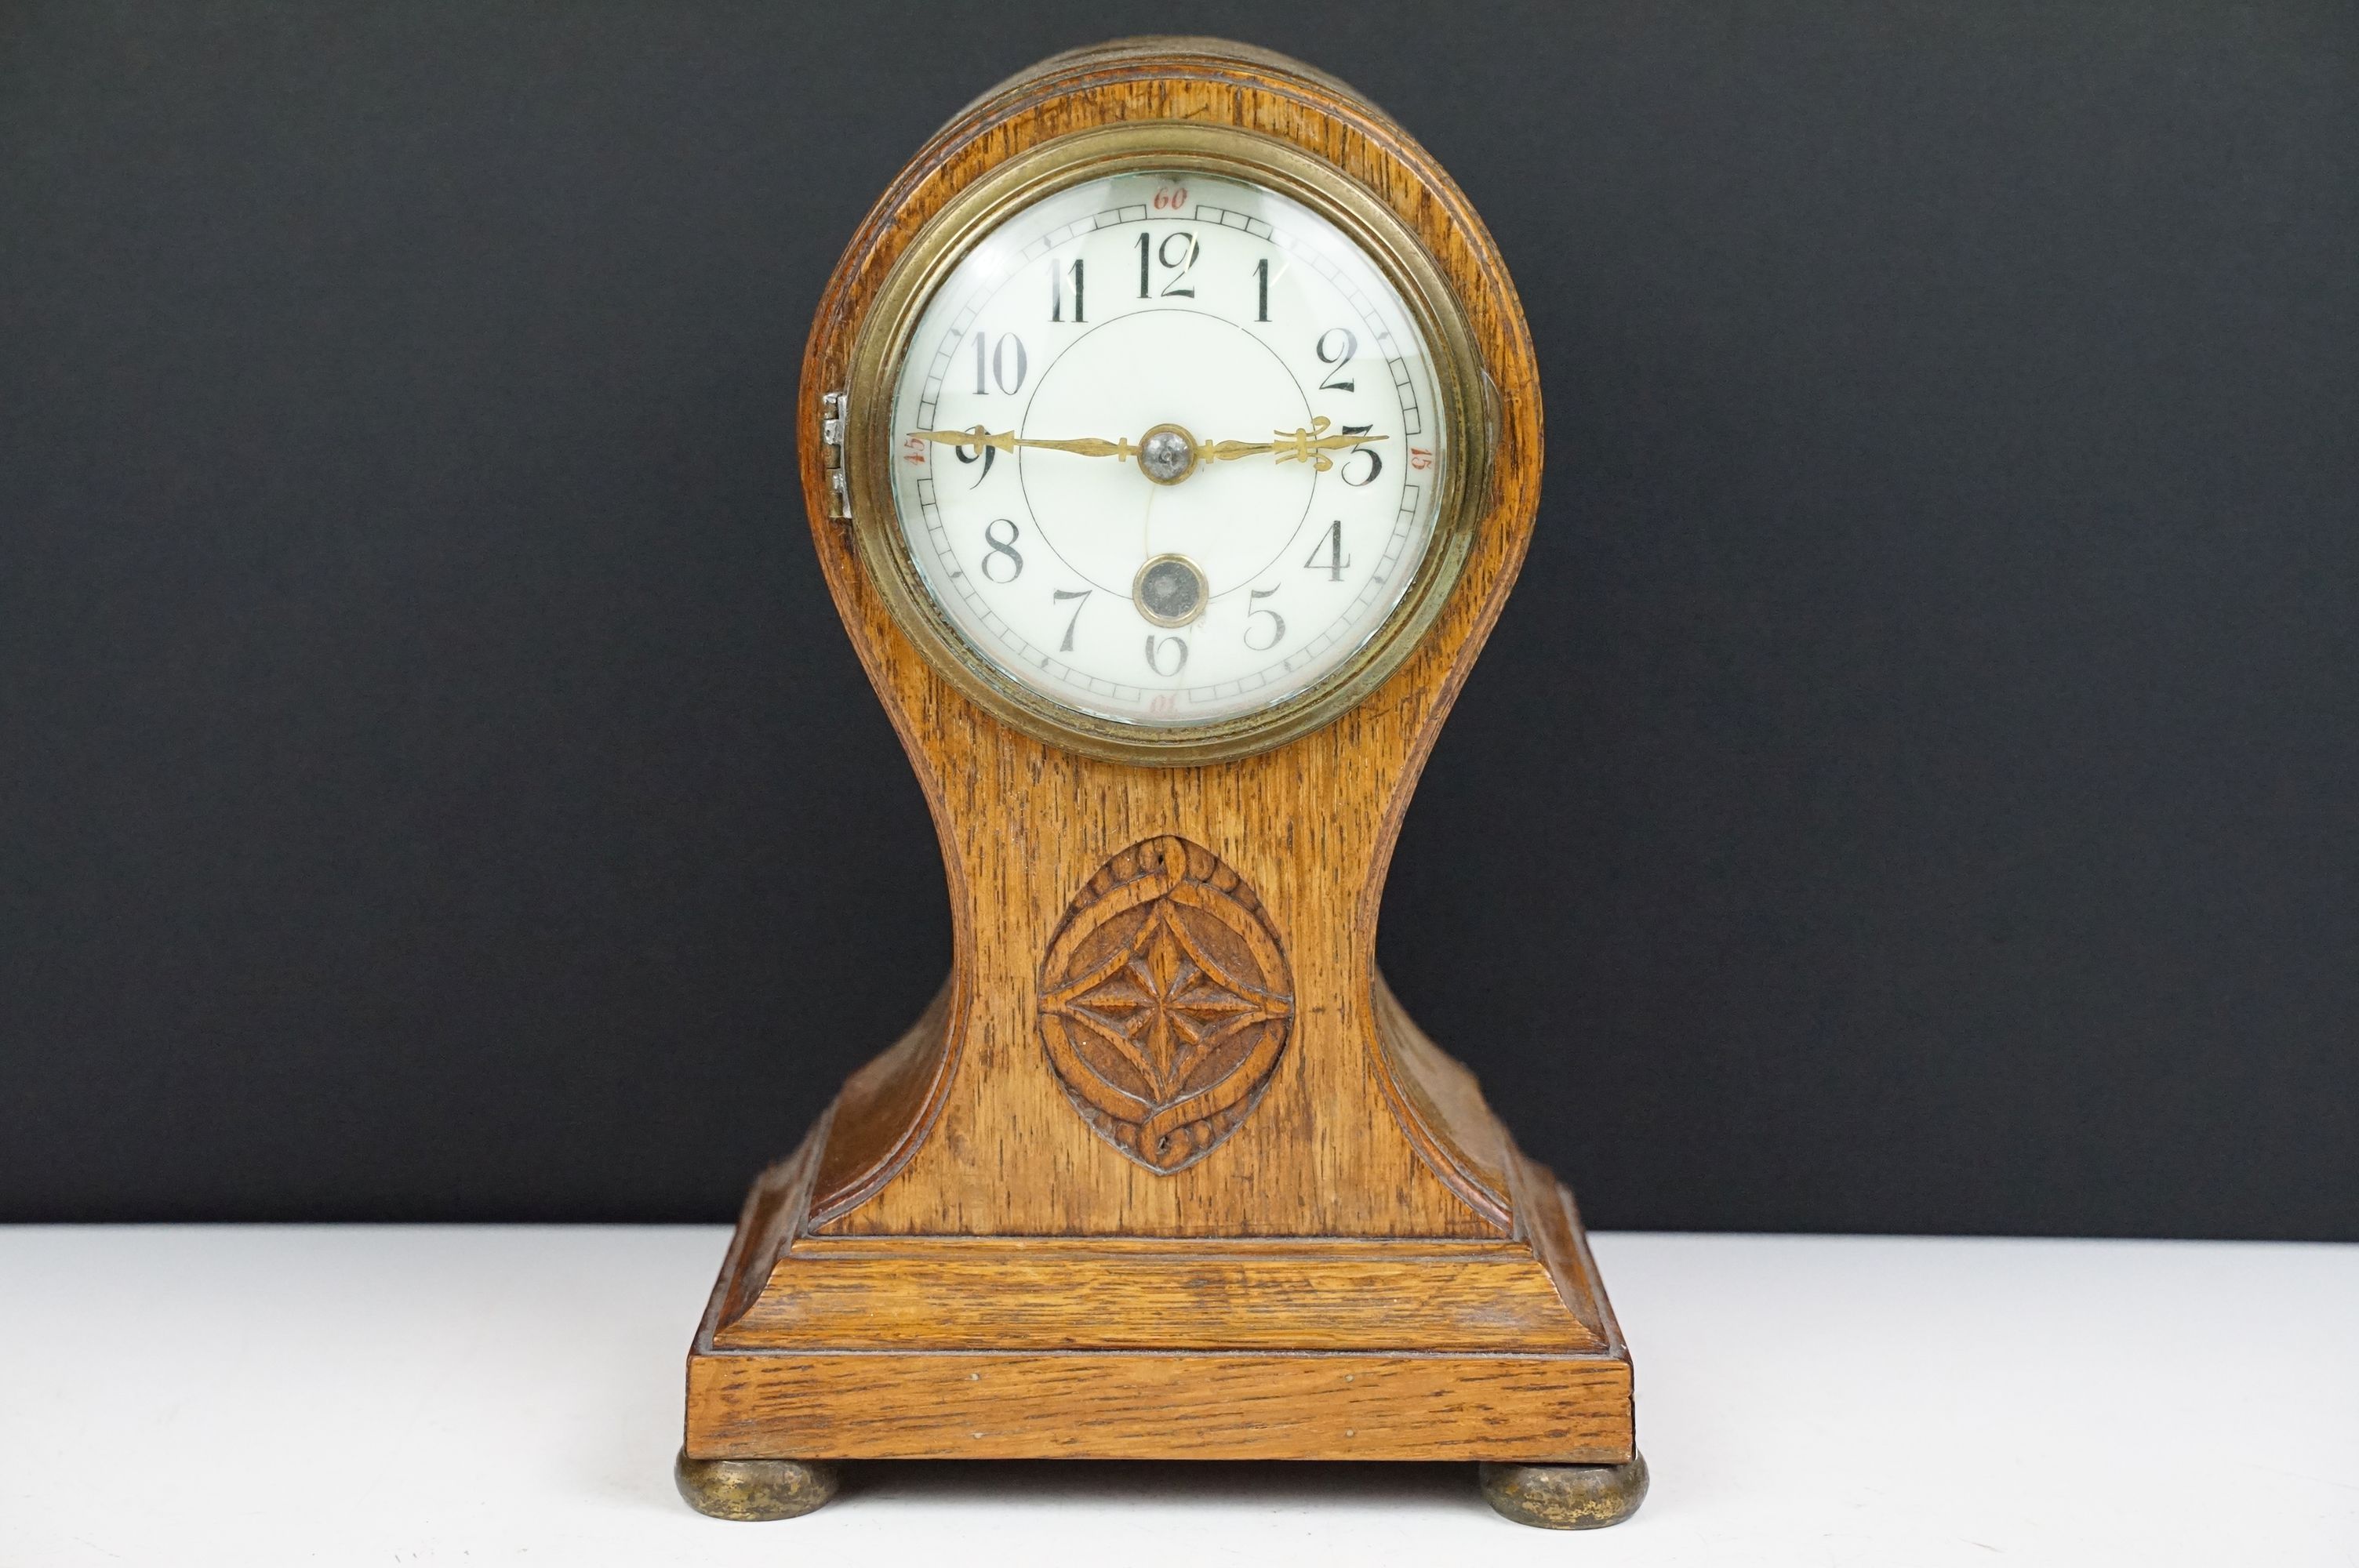 Edwardian balloon oak mantel clock with white enamel dial and carved detail, approx 22.5cm high